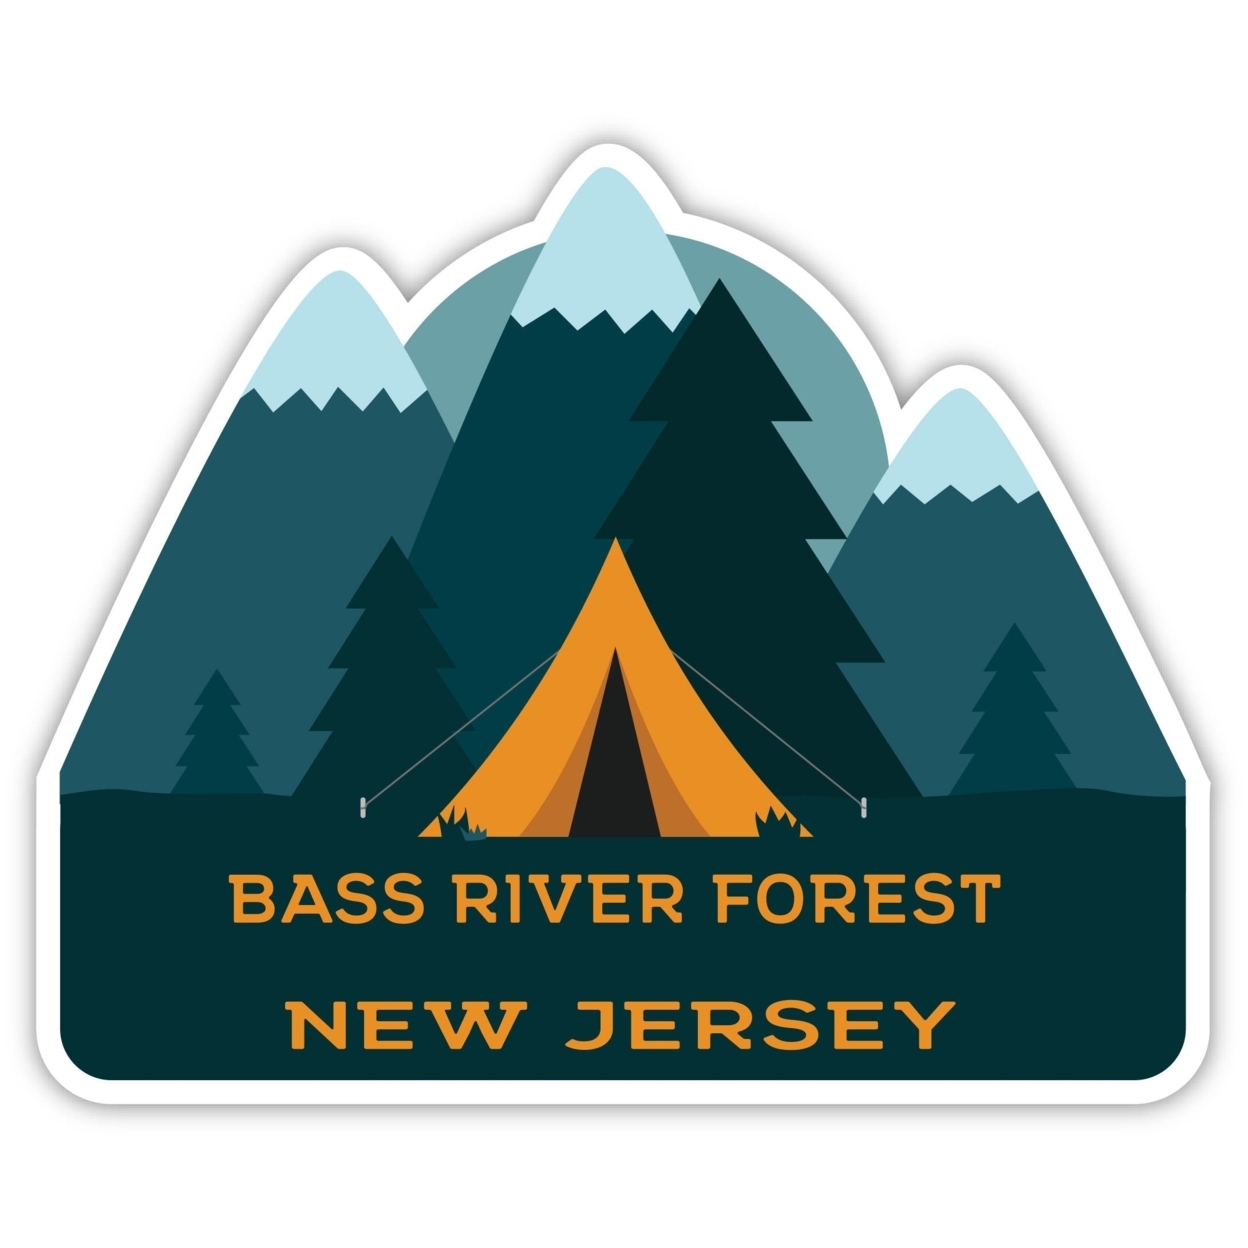 Bass River Forest New Jersey Souvenir Decorative Stickers (Choose Theme And Size) - 4-Pack, 10-Inch, Tent